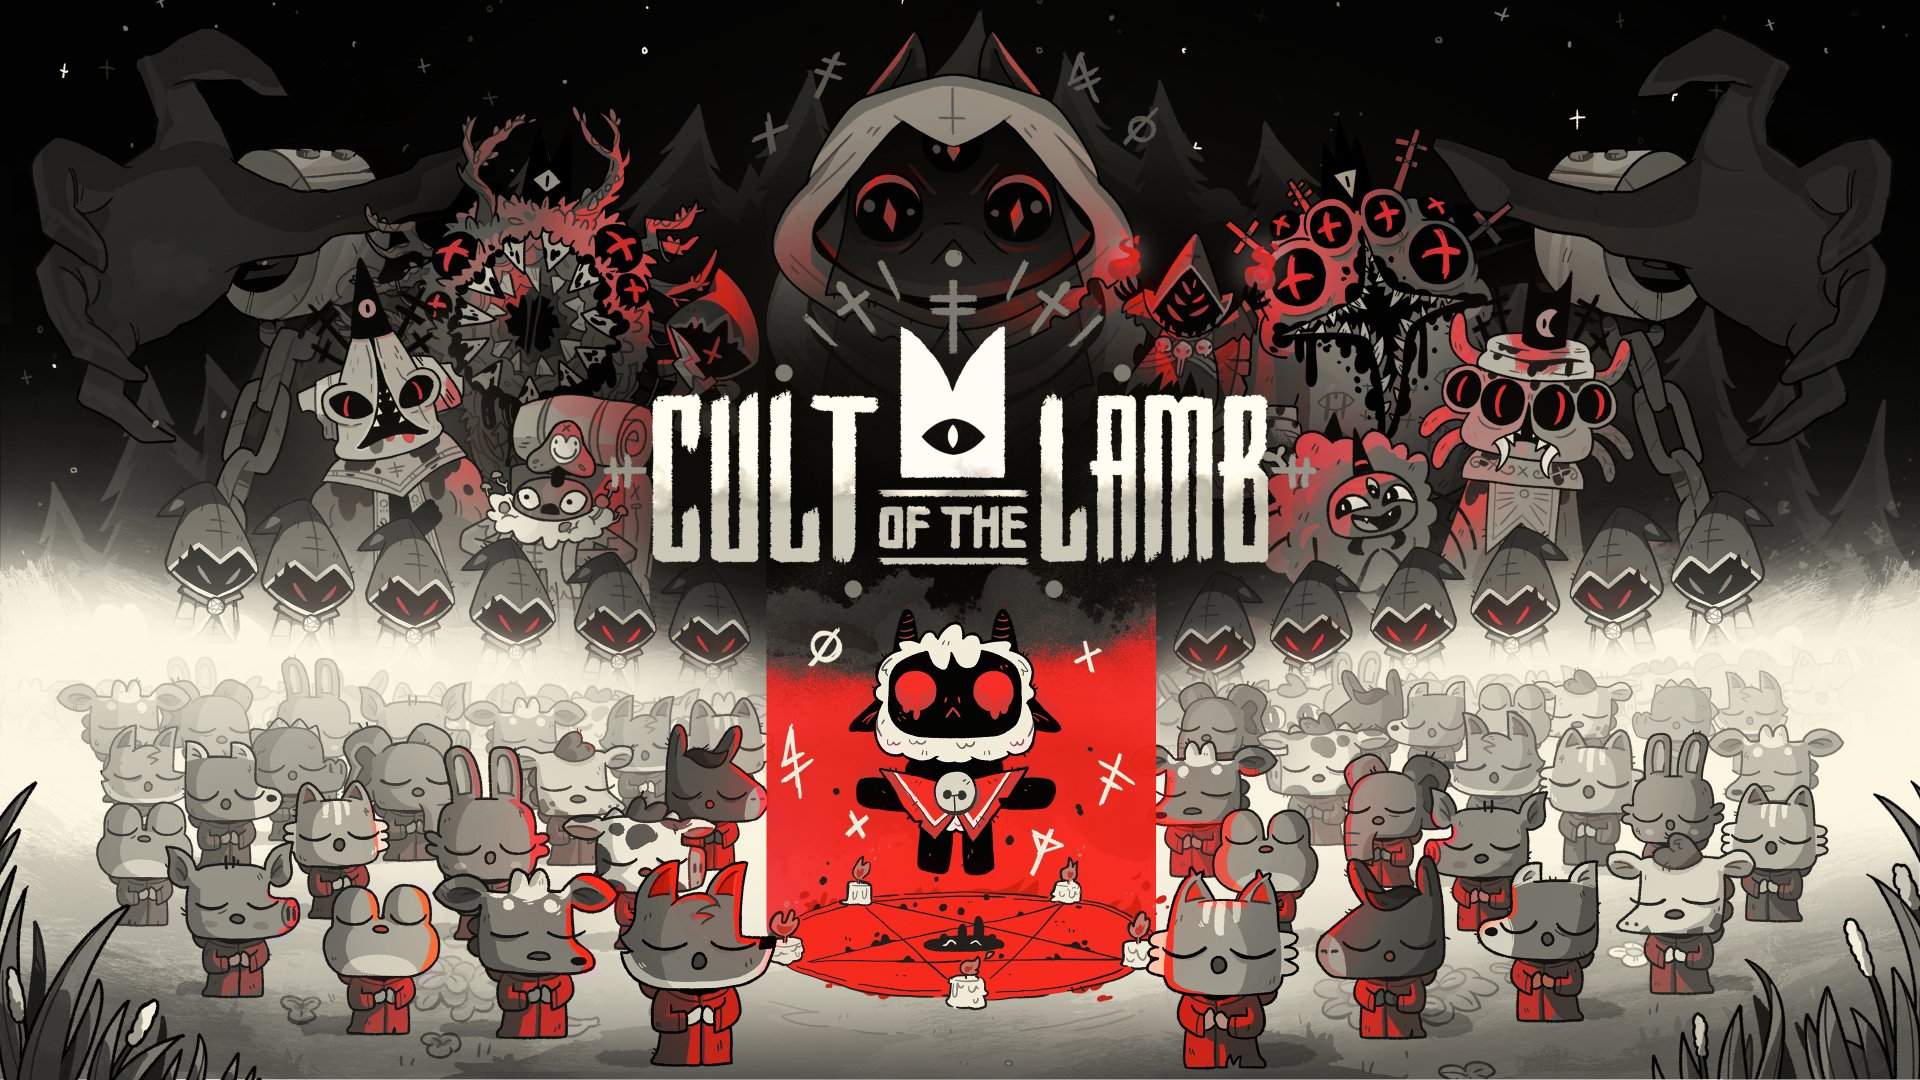 The Lamb, The Old One, and Cultists from Cult of the Lamb